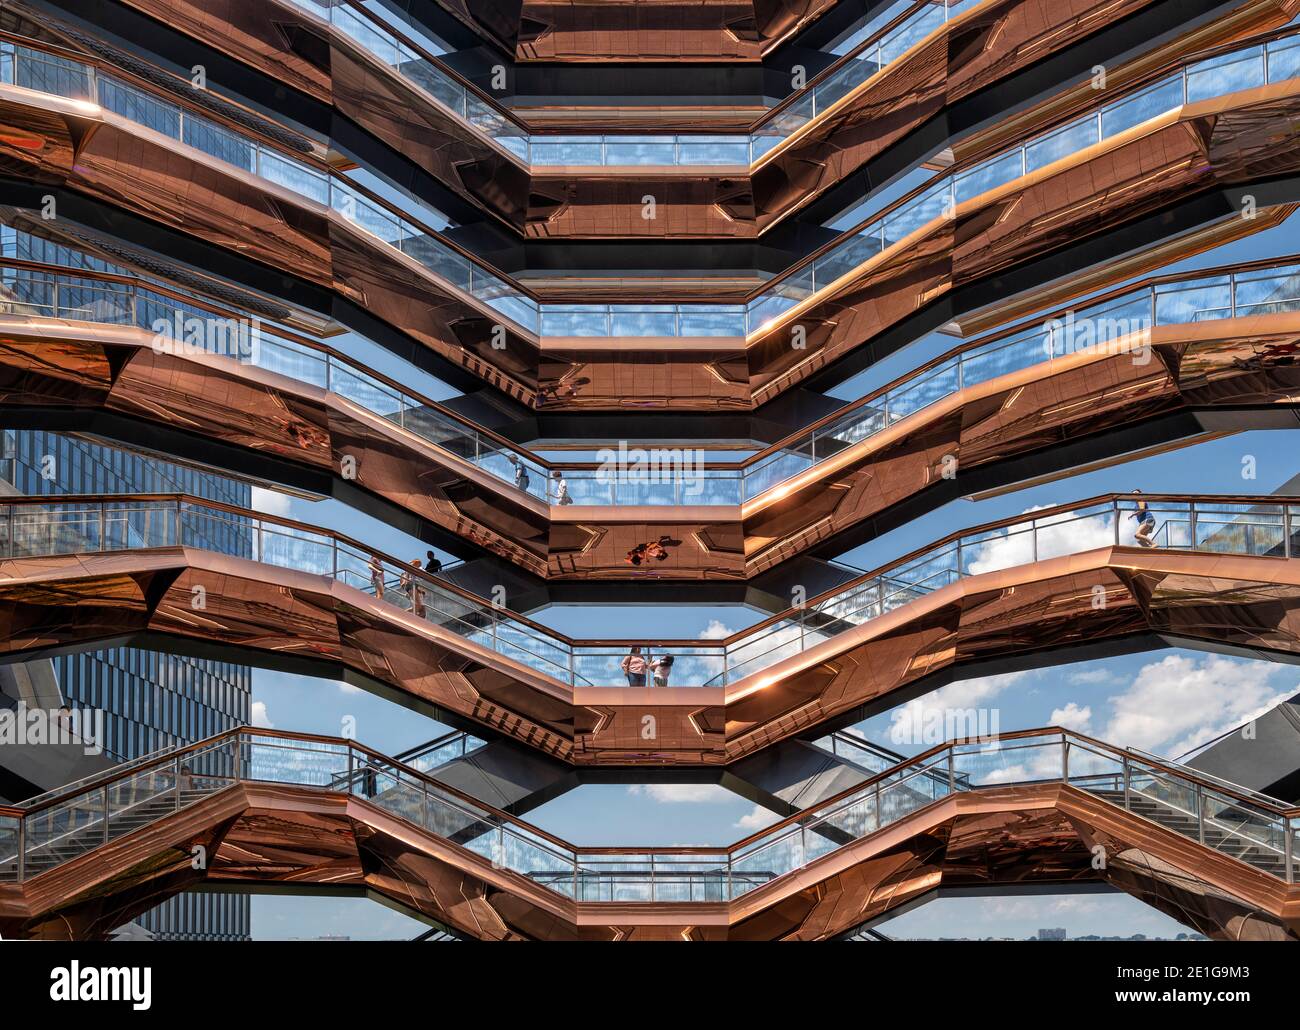 Close up detail of the Vessel, Hudson Yards, New York City, USA. Building completed in 2019. Stock Photo